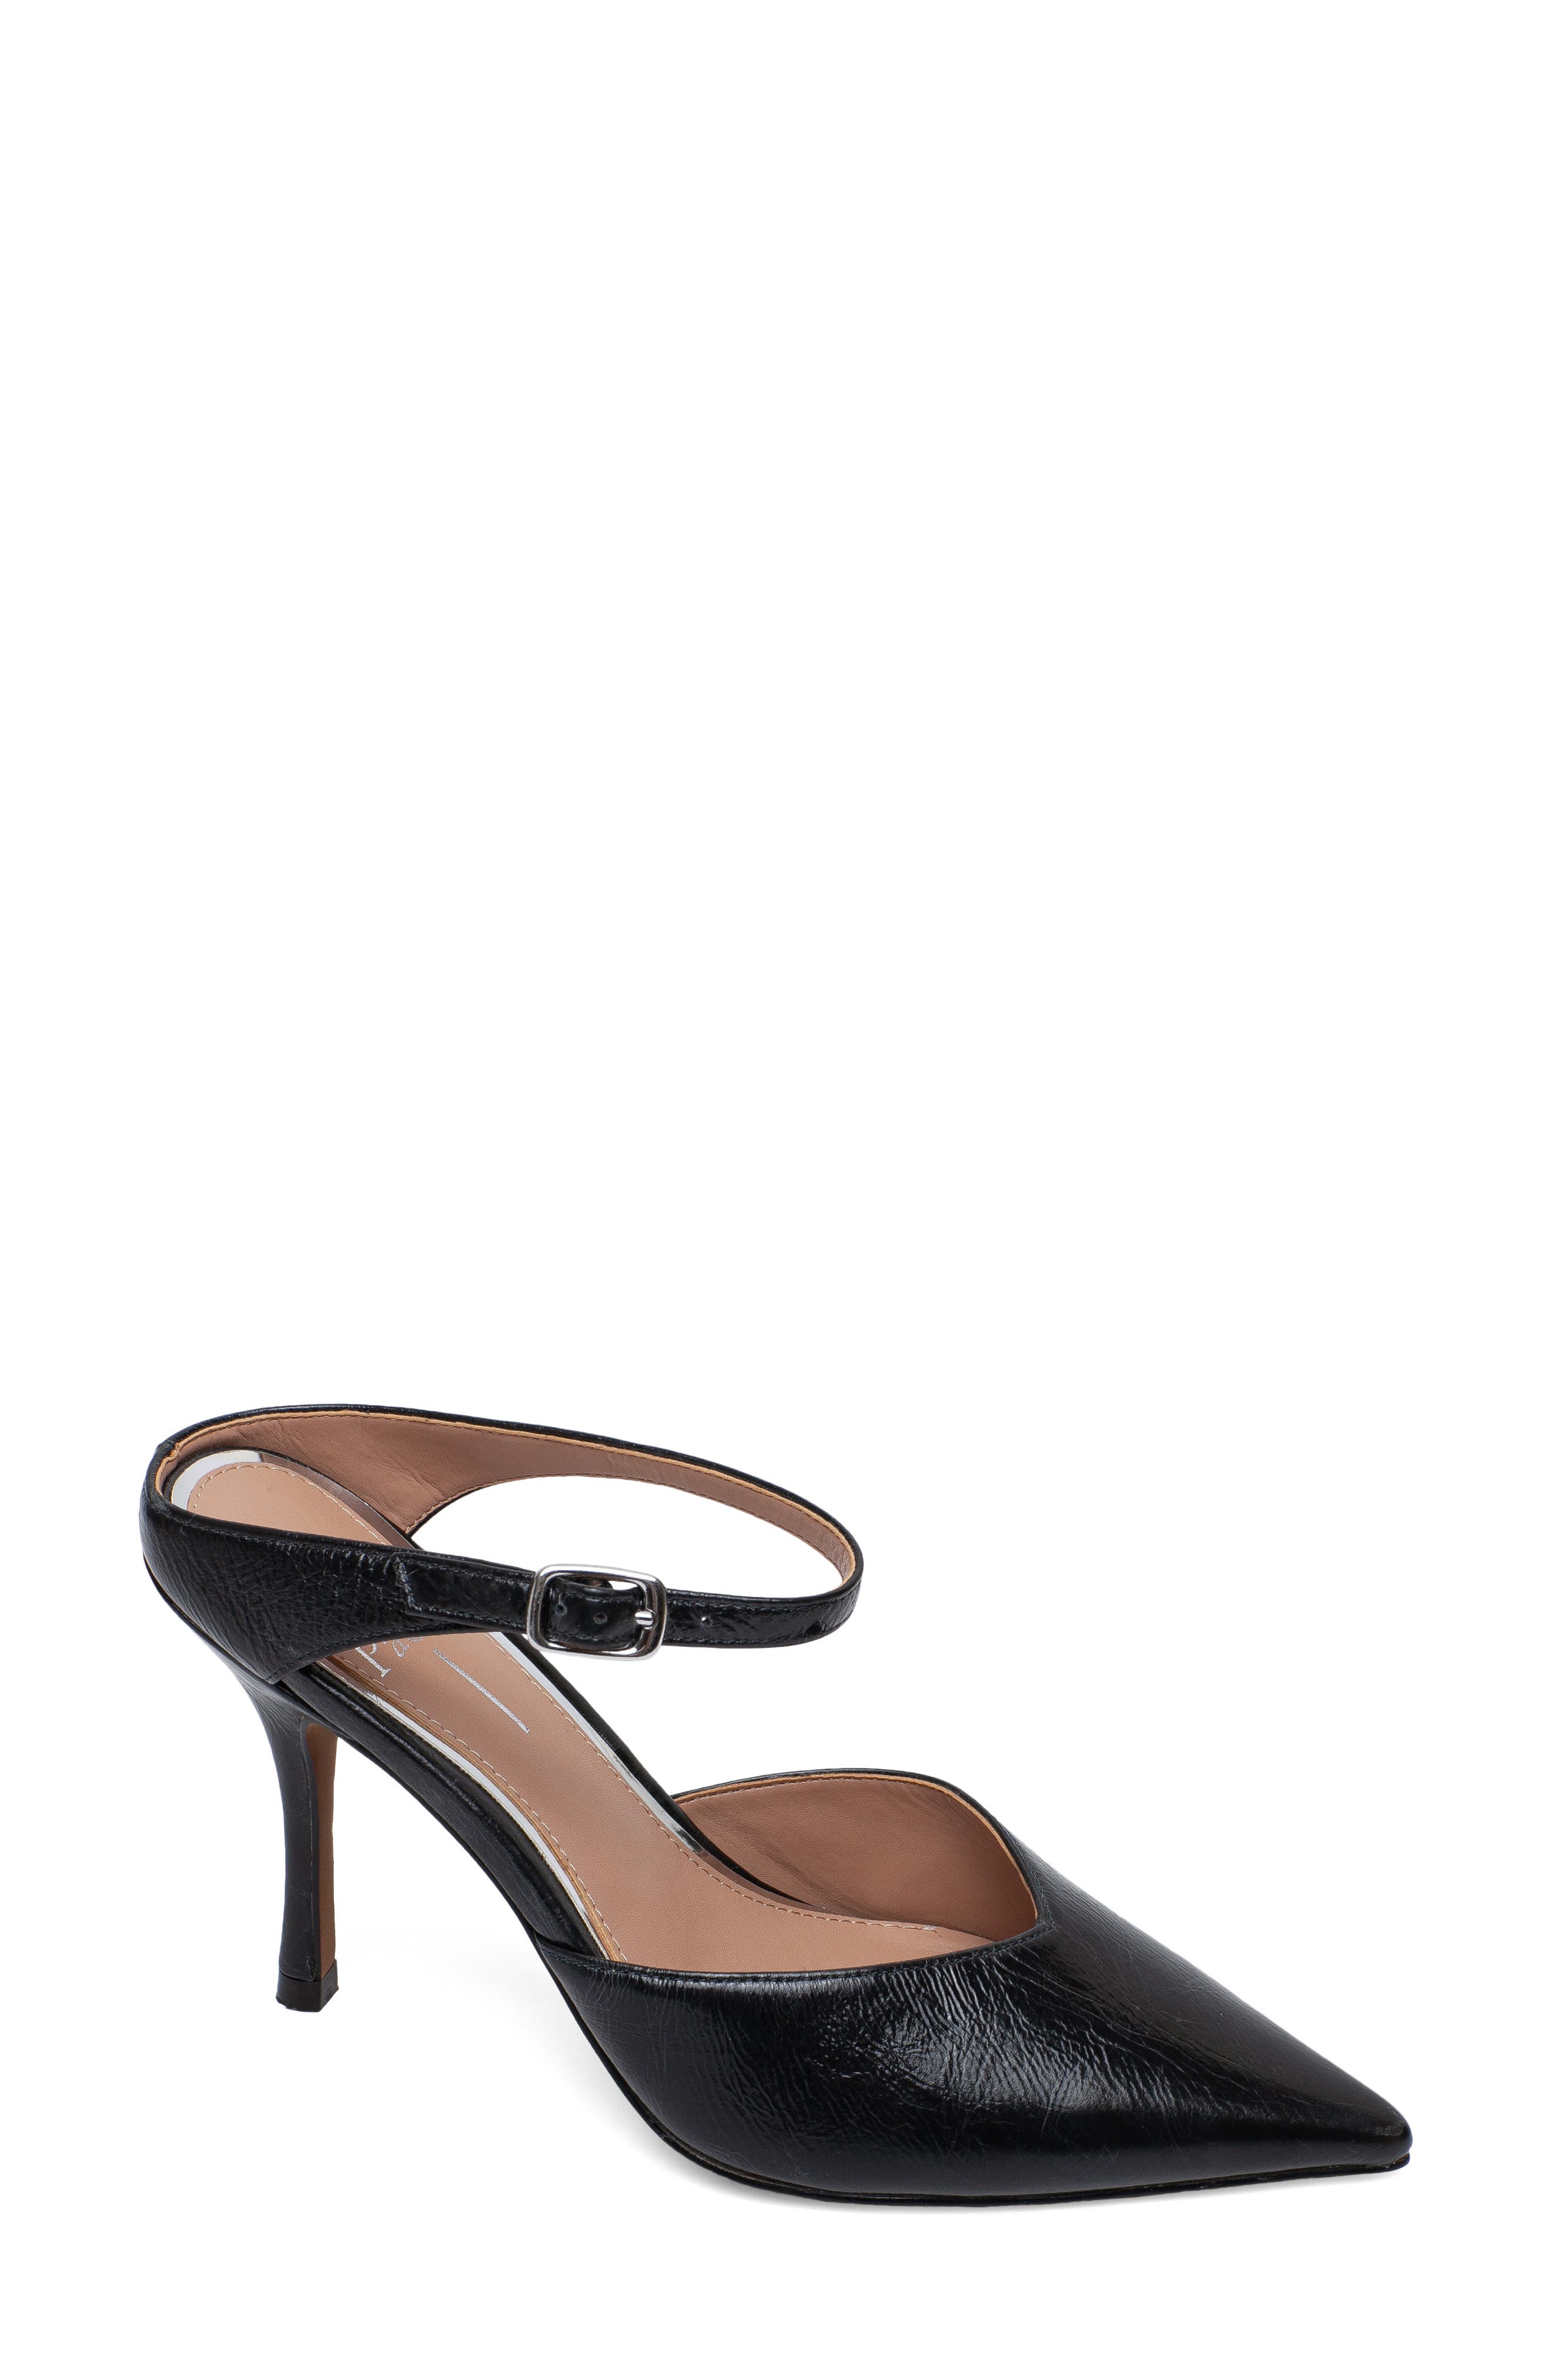 Linea Paolo Yvonne Pointed Toe Mule in Charcoal